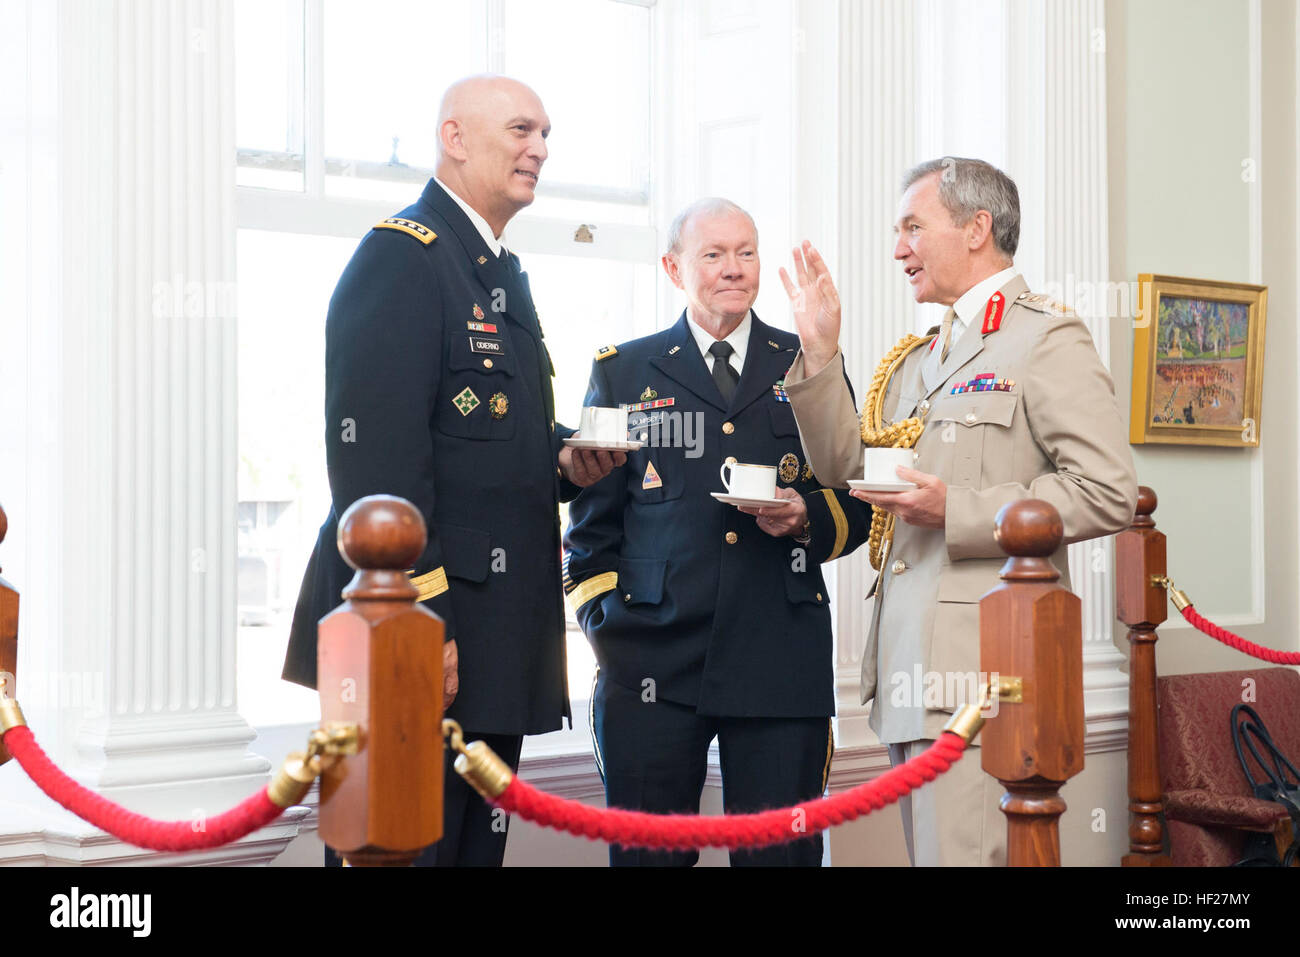 From left, Chief of Staff of the U.S. Army Gen. Raymond T. Odierno, Chairman of the Joint Chiefs of Staff U.S. Army Gen. Martin E. Dempsey and U.K. Chief of Defense Staff for the British Armed Forces Gen. Sir Nicholas Houghton talk after a Guard of Honor ceremony kicking off a Defense Chiefs Strategic Dialog with the U.S. Joint Chiefs of Staff and their U.K. counterparts in London June 10, 2014. (DoD photo by Mass Communication Specialist 1st Class Daniel Hinton, U.S. Navy/Released) US, UK Joint Chiefs of Staff talk collaboration 140610-D-KC128-190 Stock Photo